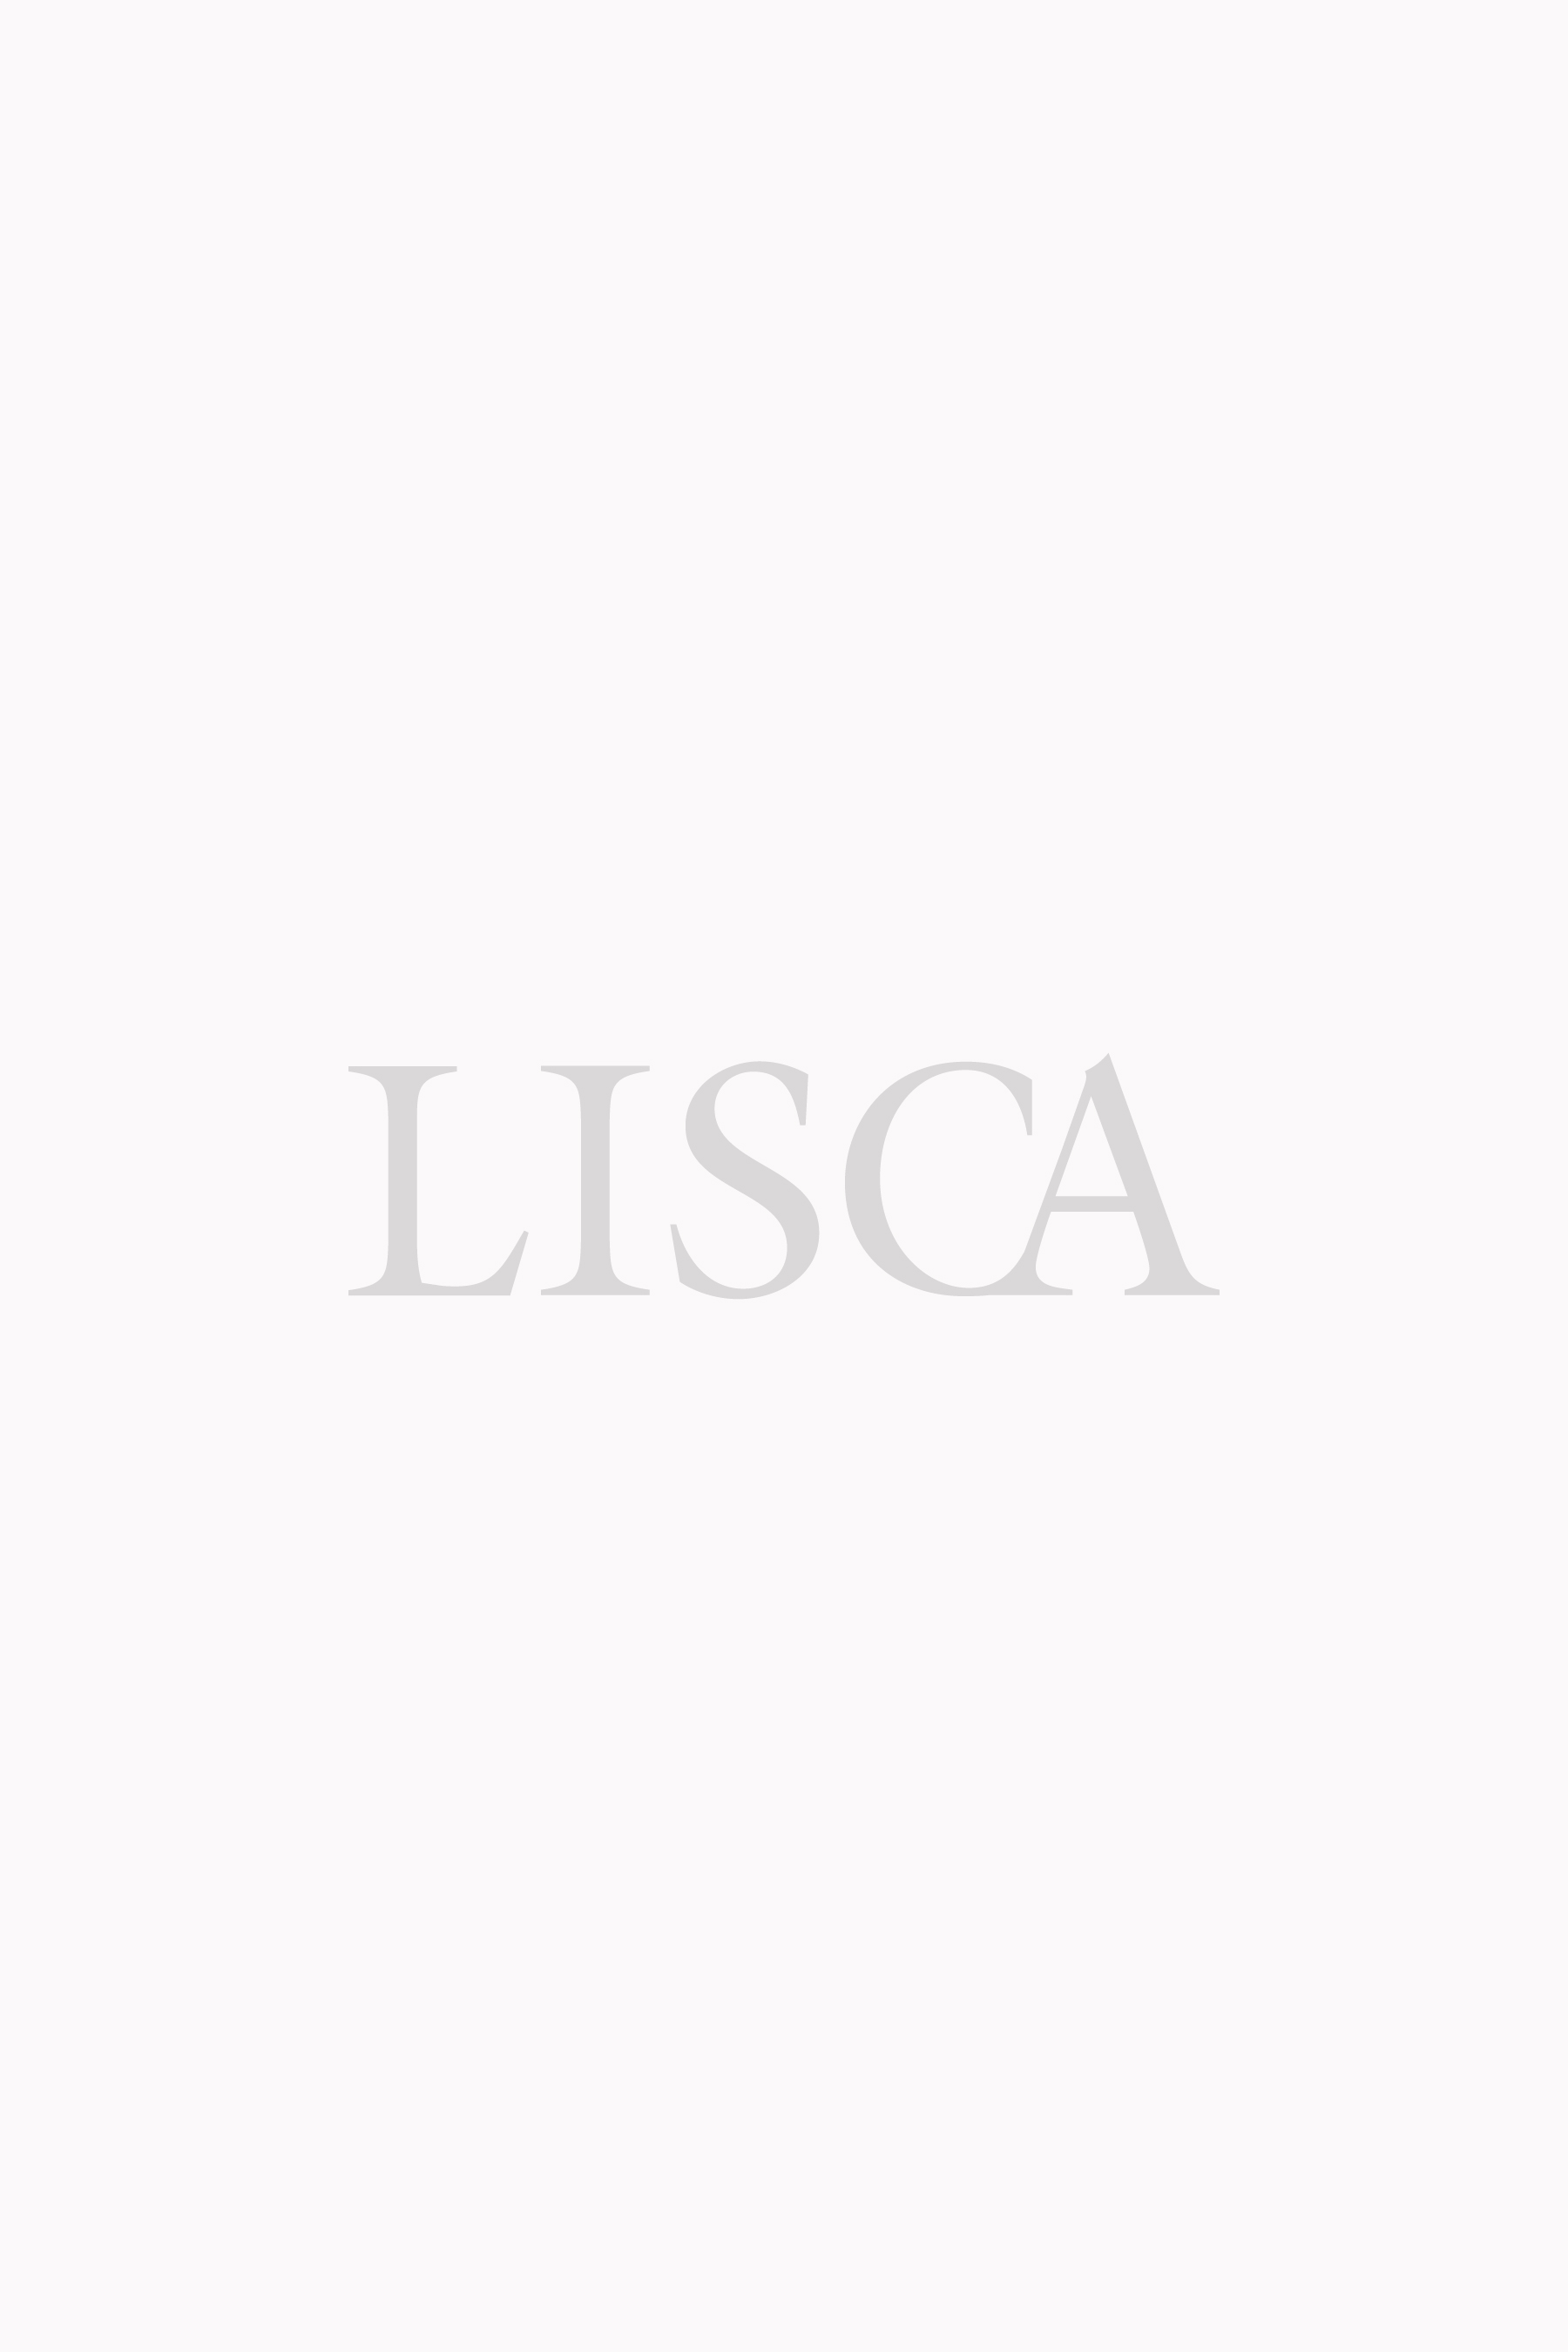 Lingerie Lisca Selection